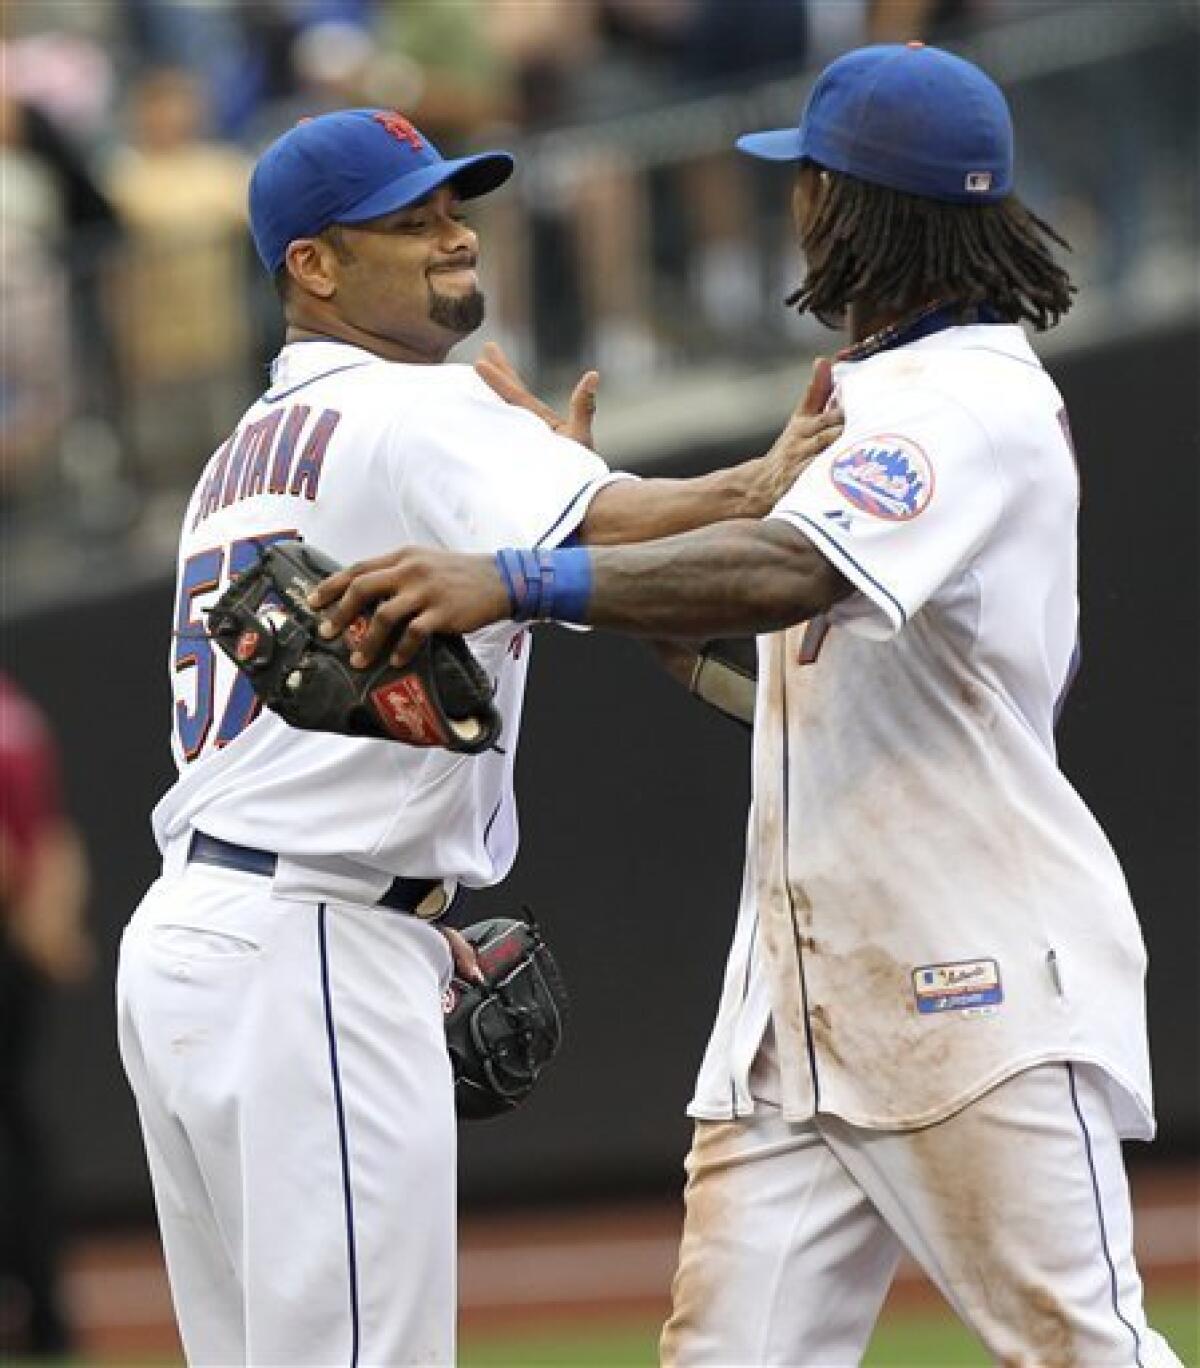 Mets blank Rockies to cap off special Old Timers' Day